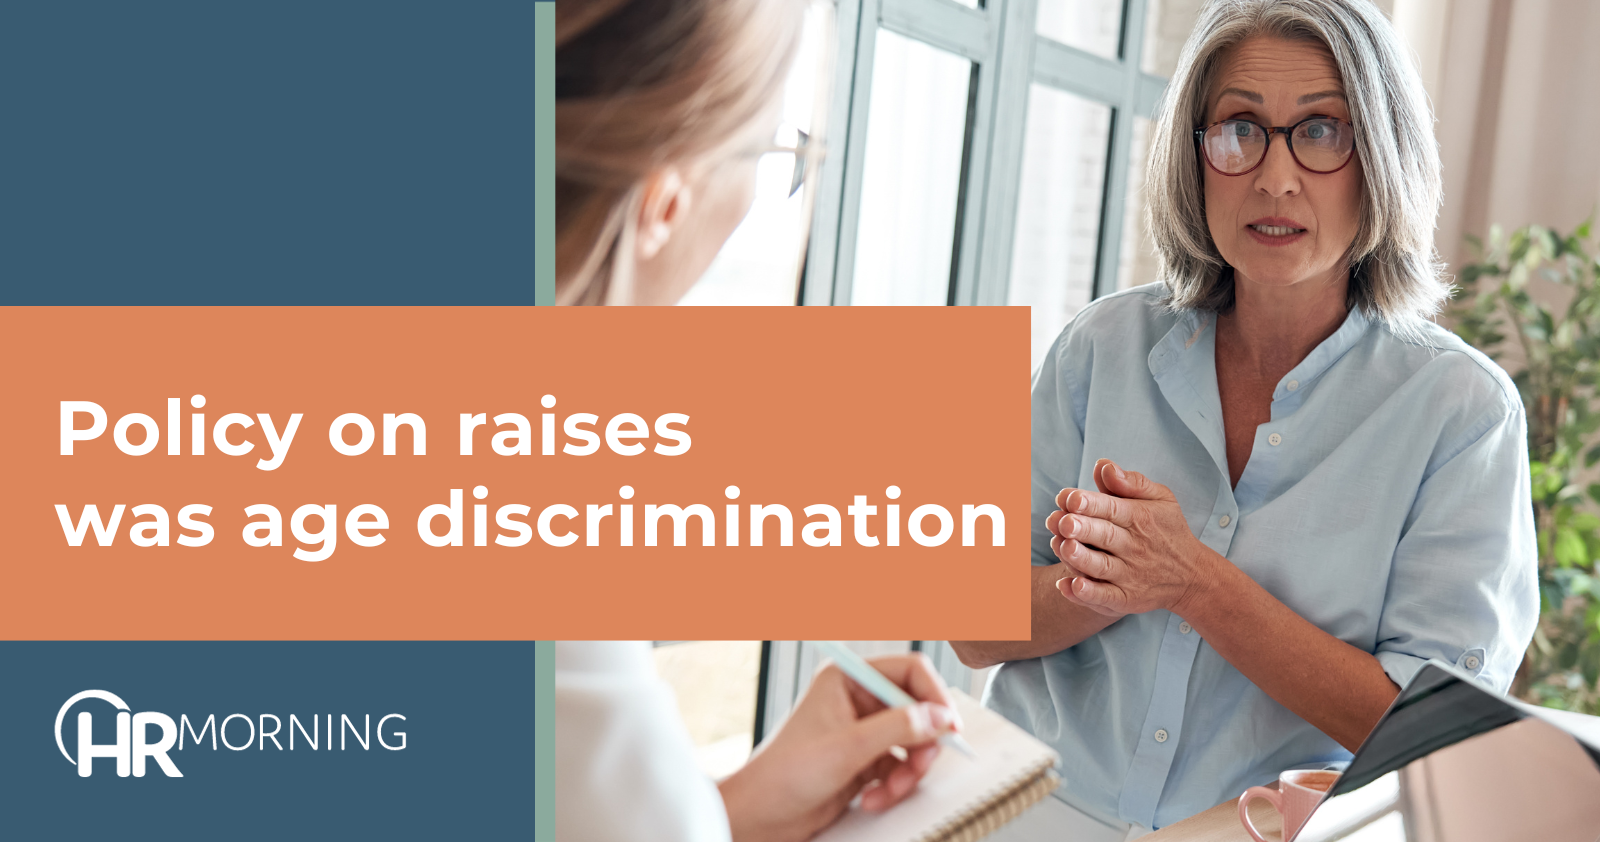 Policy on raises was age discrimination